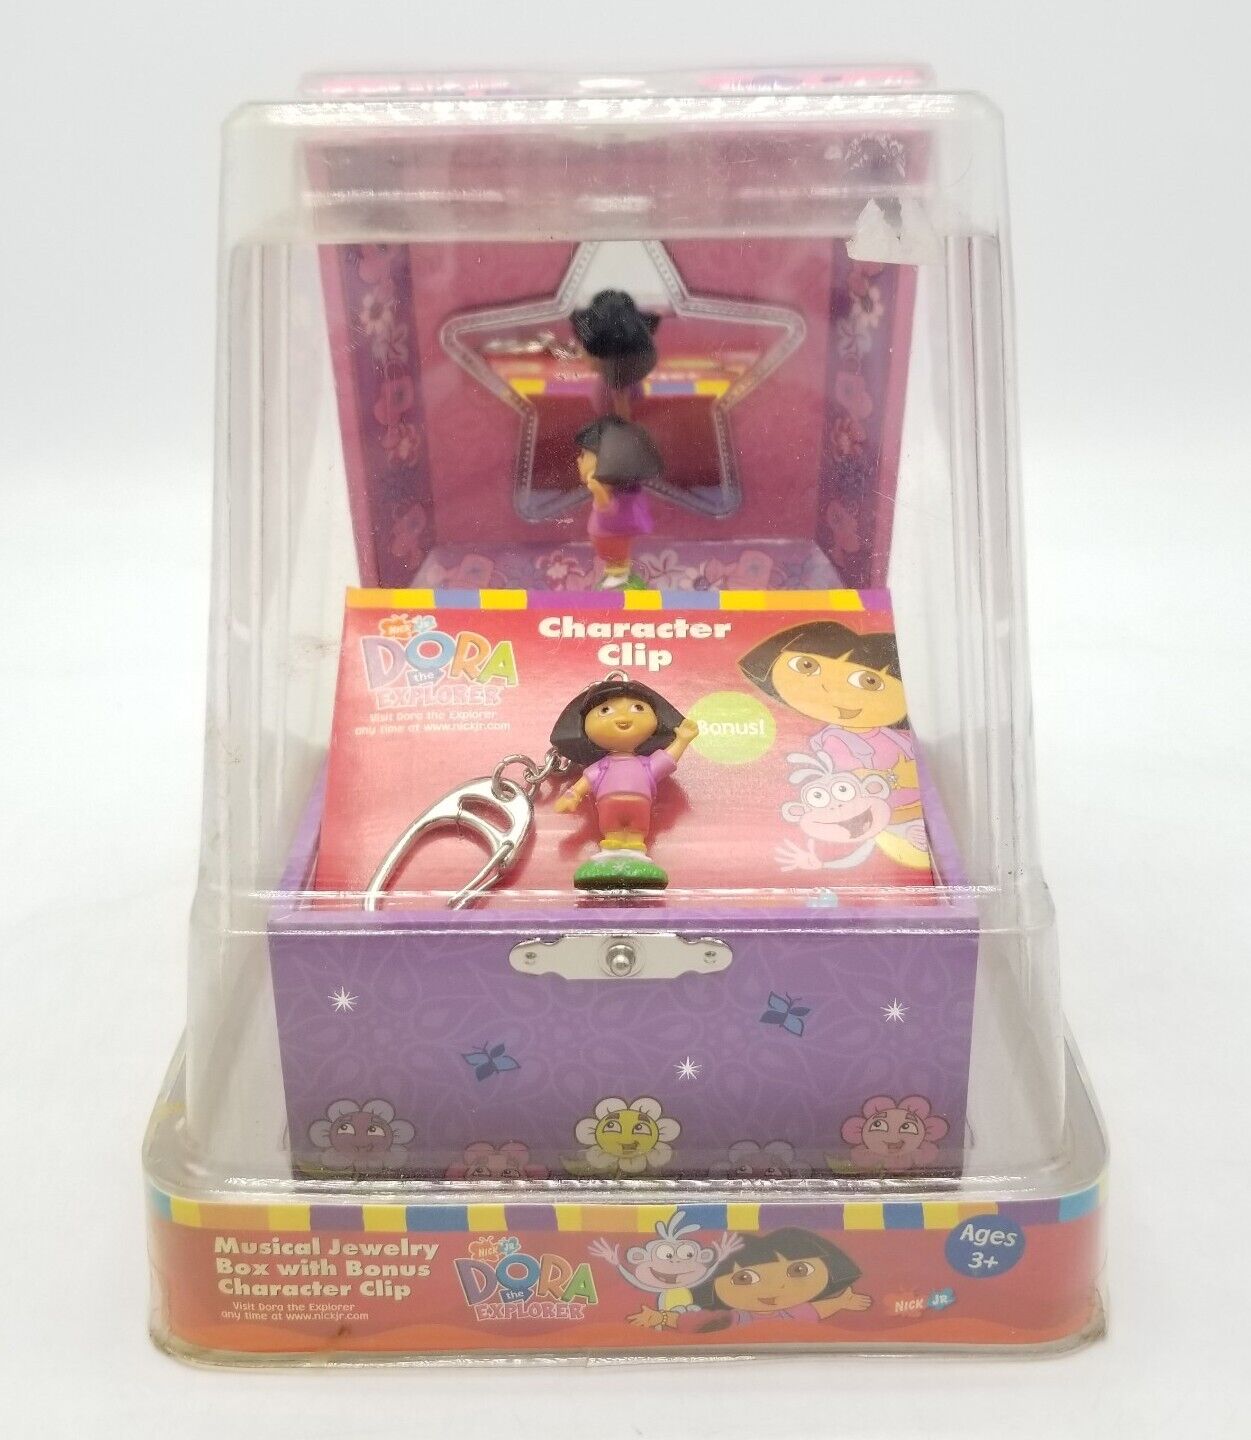 Vintage DORA THE EXPLORER Musical Jewelry Box & Character Clip 2004 New in Box